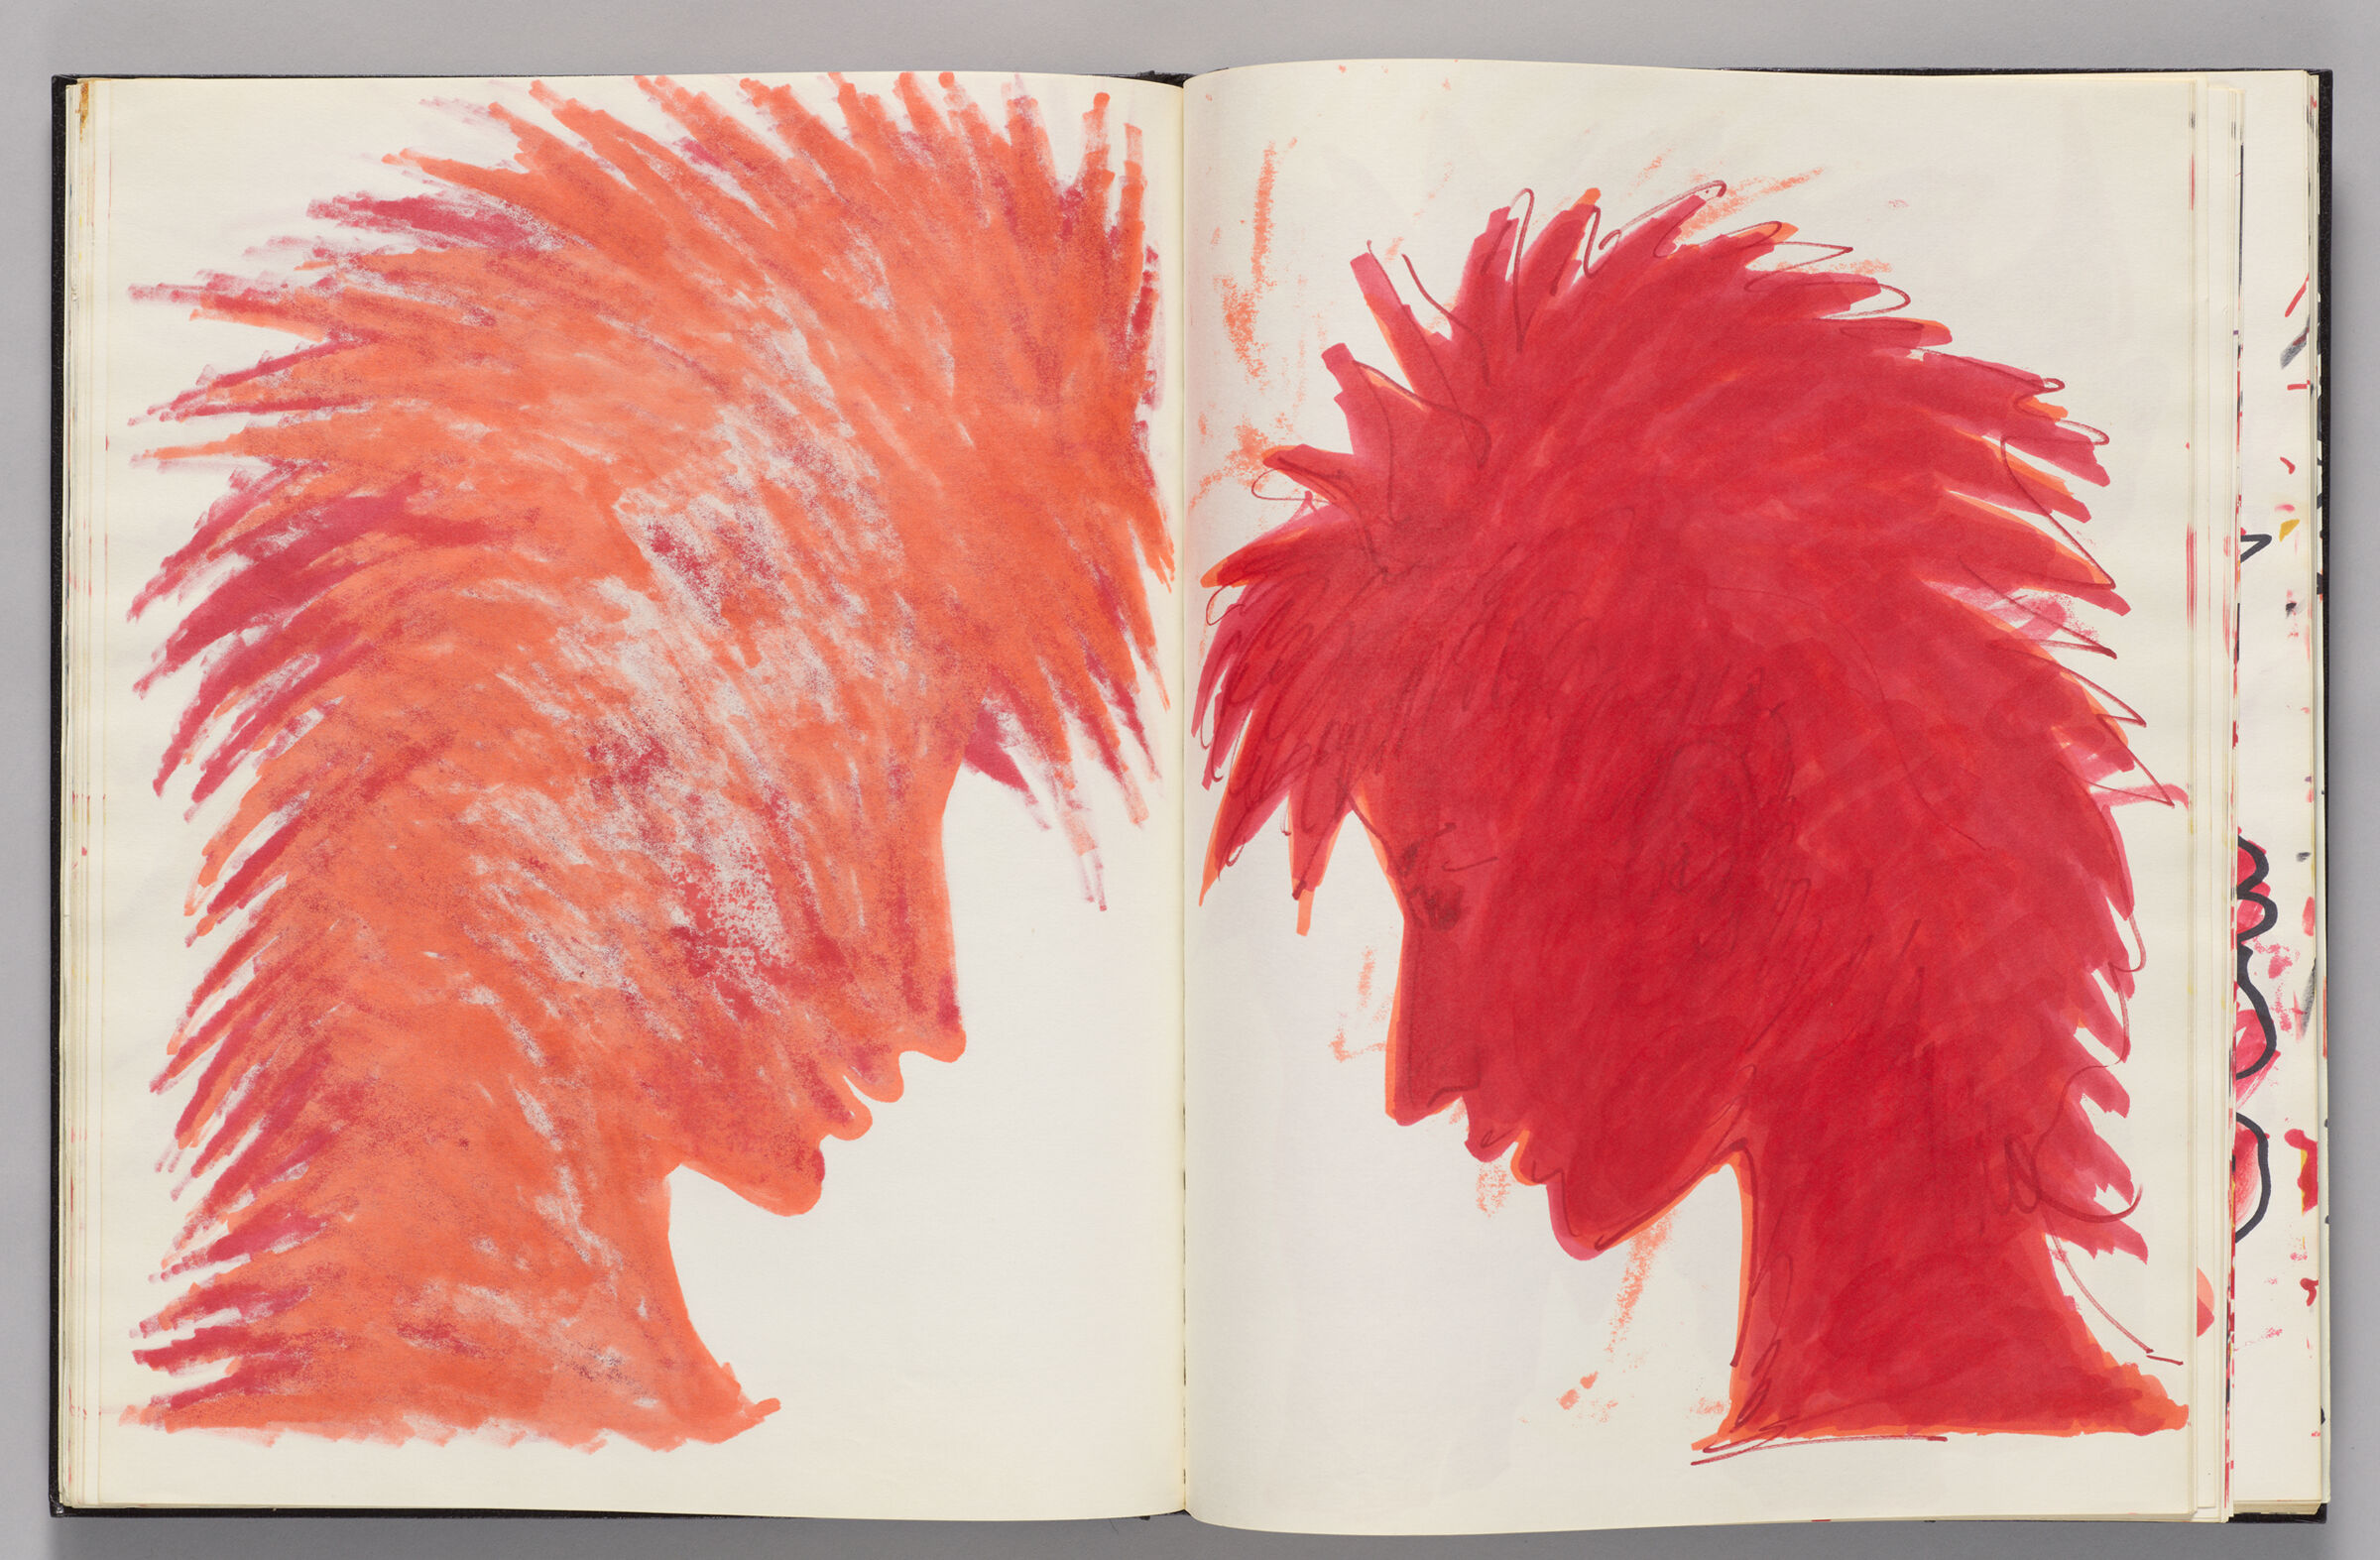 Untitled (Bleed-Through Of Previous Page, Left Page); Untitled (Head In Profile With Spiky Hair, Right Page)